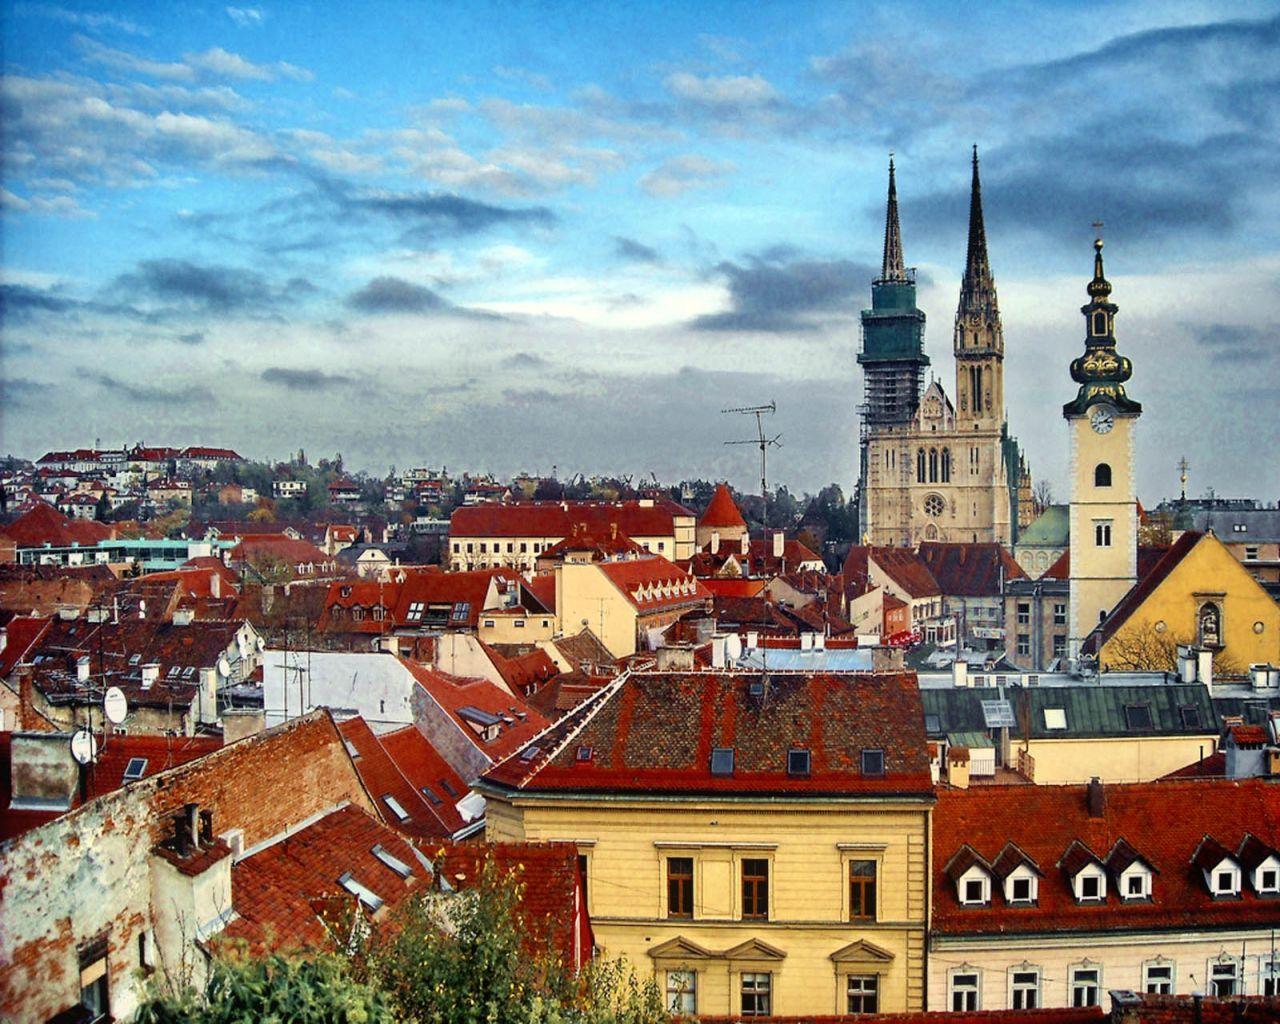 zagreb croatia tourism wallpaper. Travel picture and Travel guides